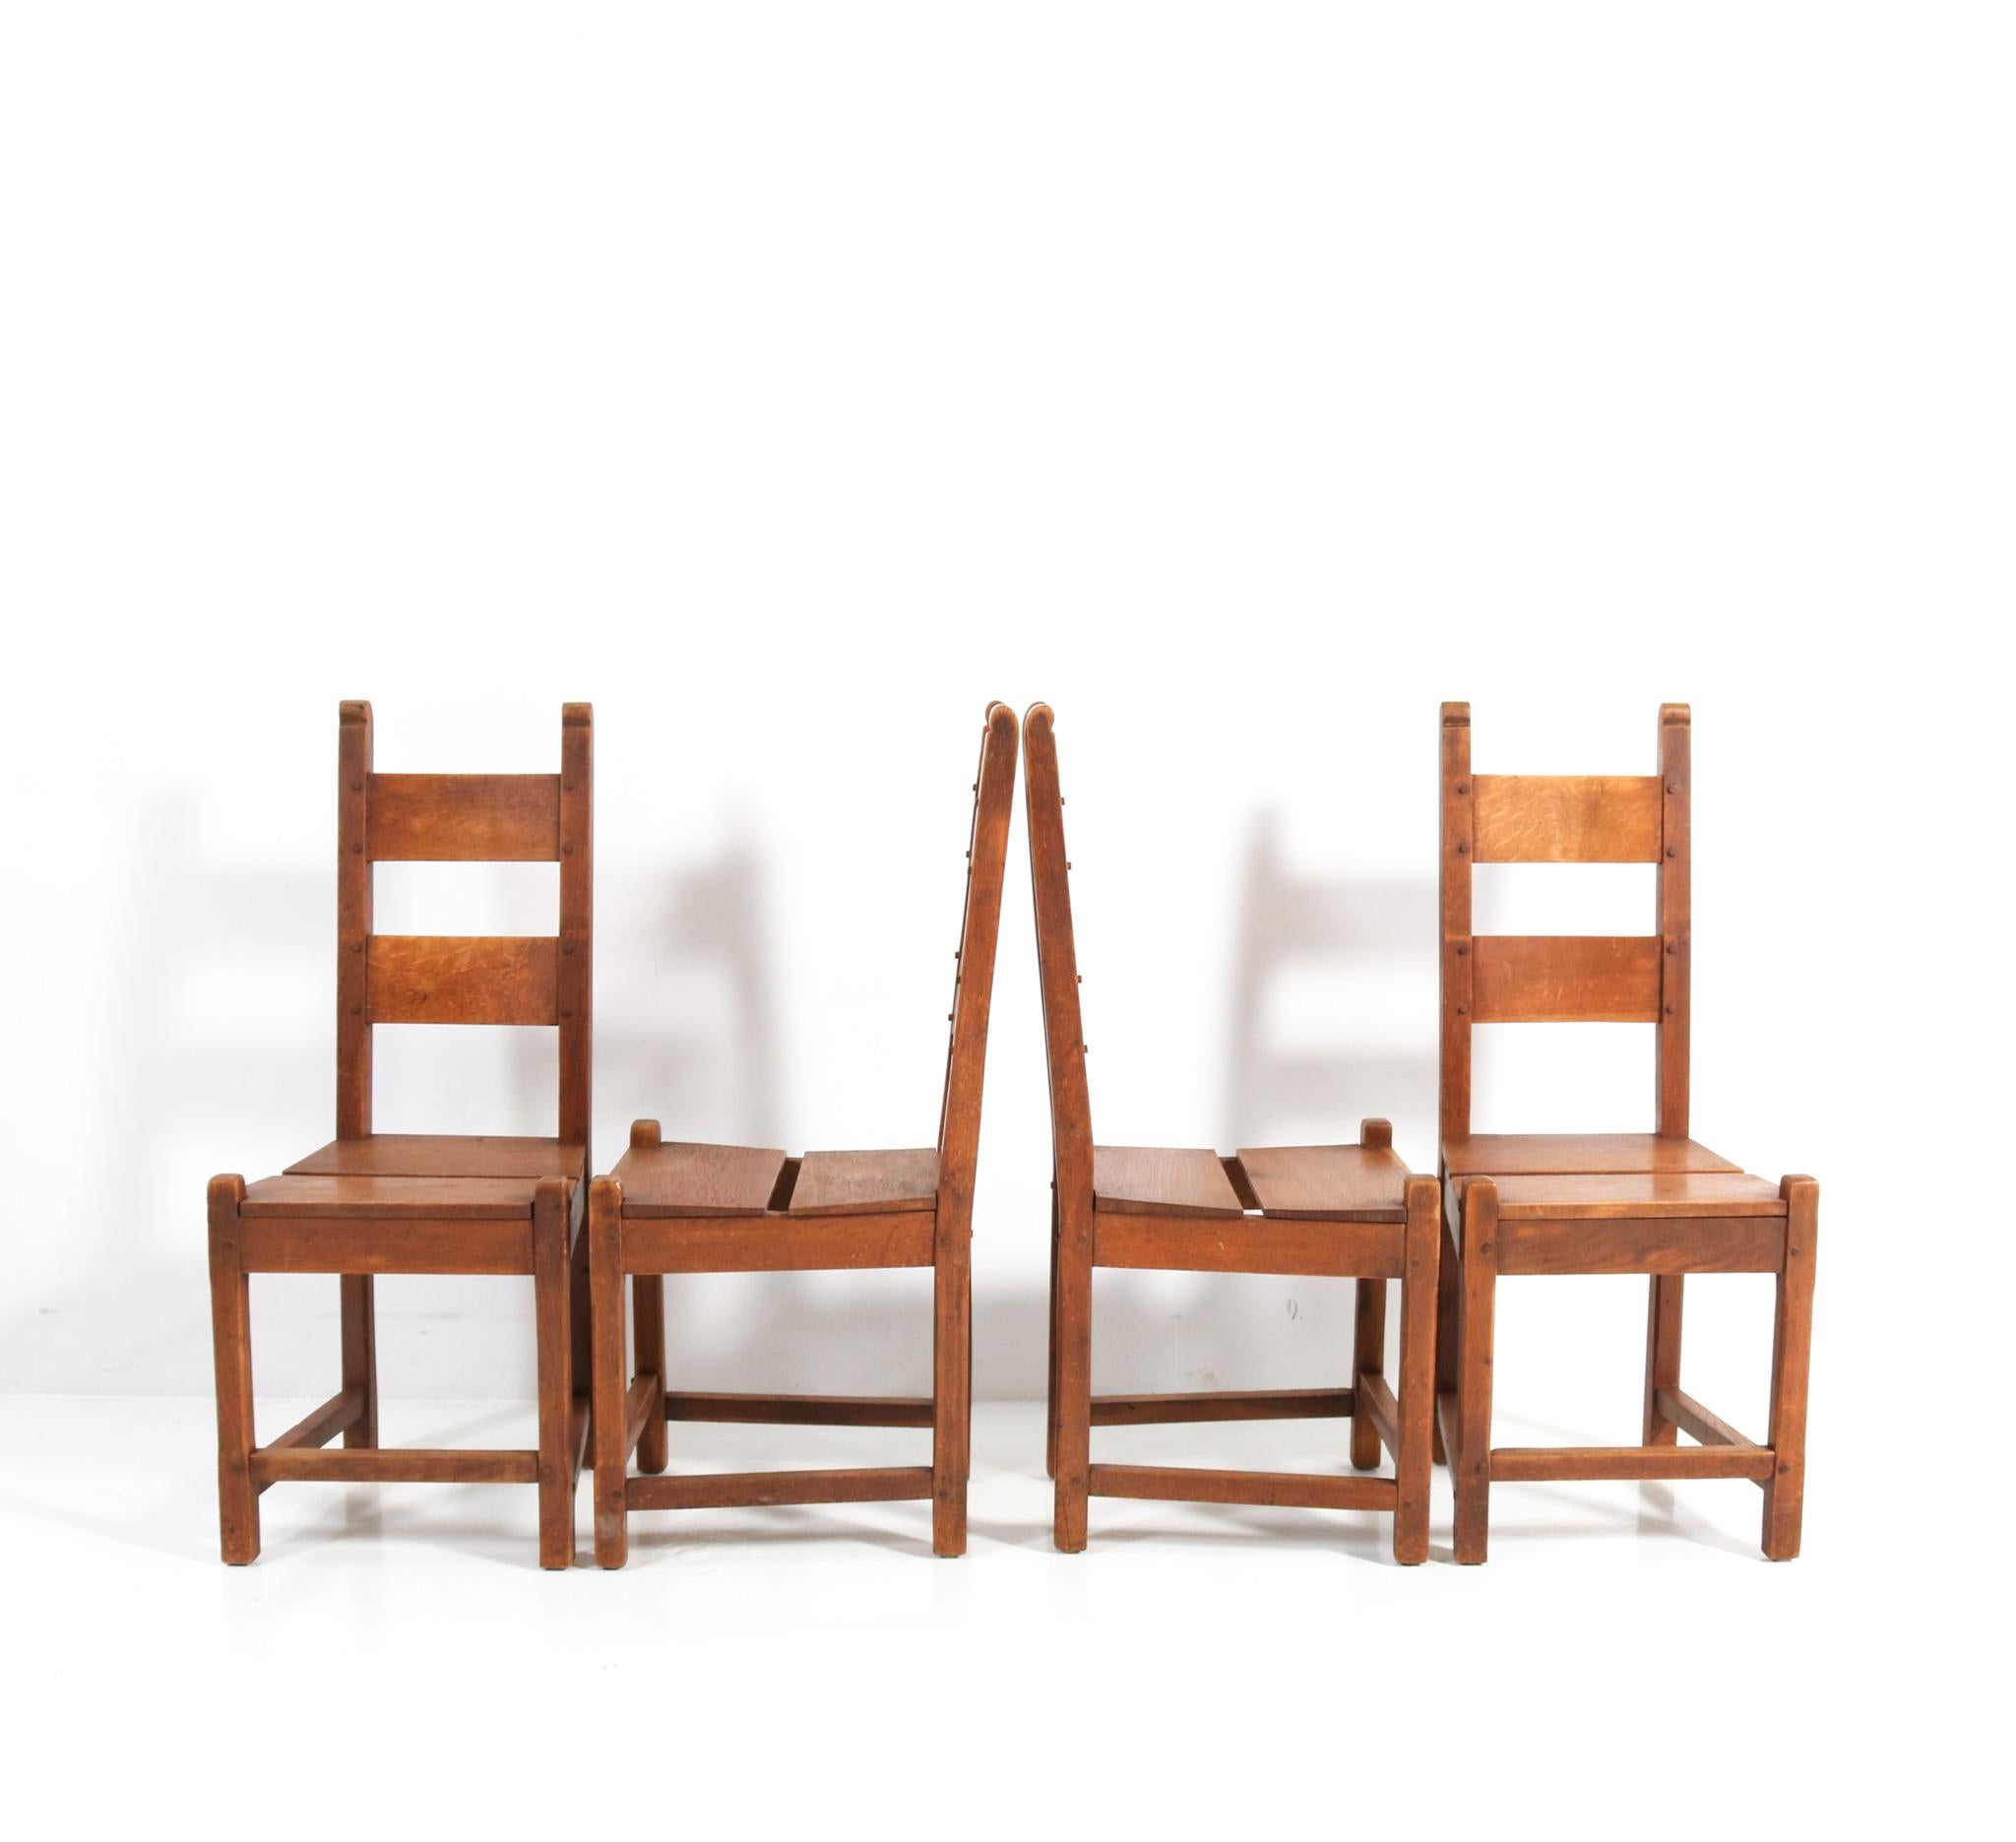 Four Oak Rustic Brutalist Chairs, 1940s In Good Condition For Sale In Amsterdam, NL